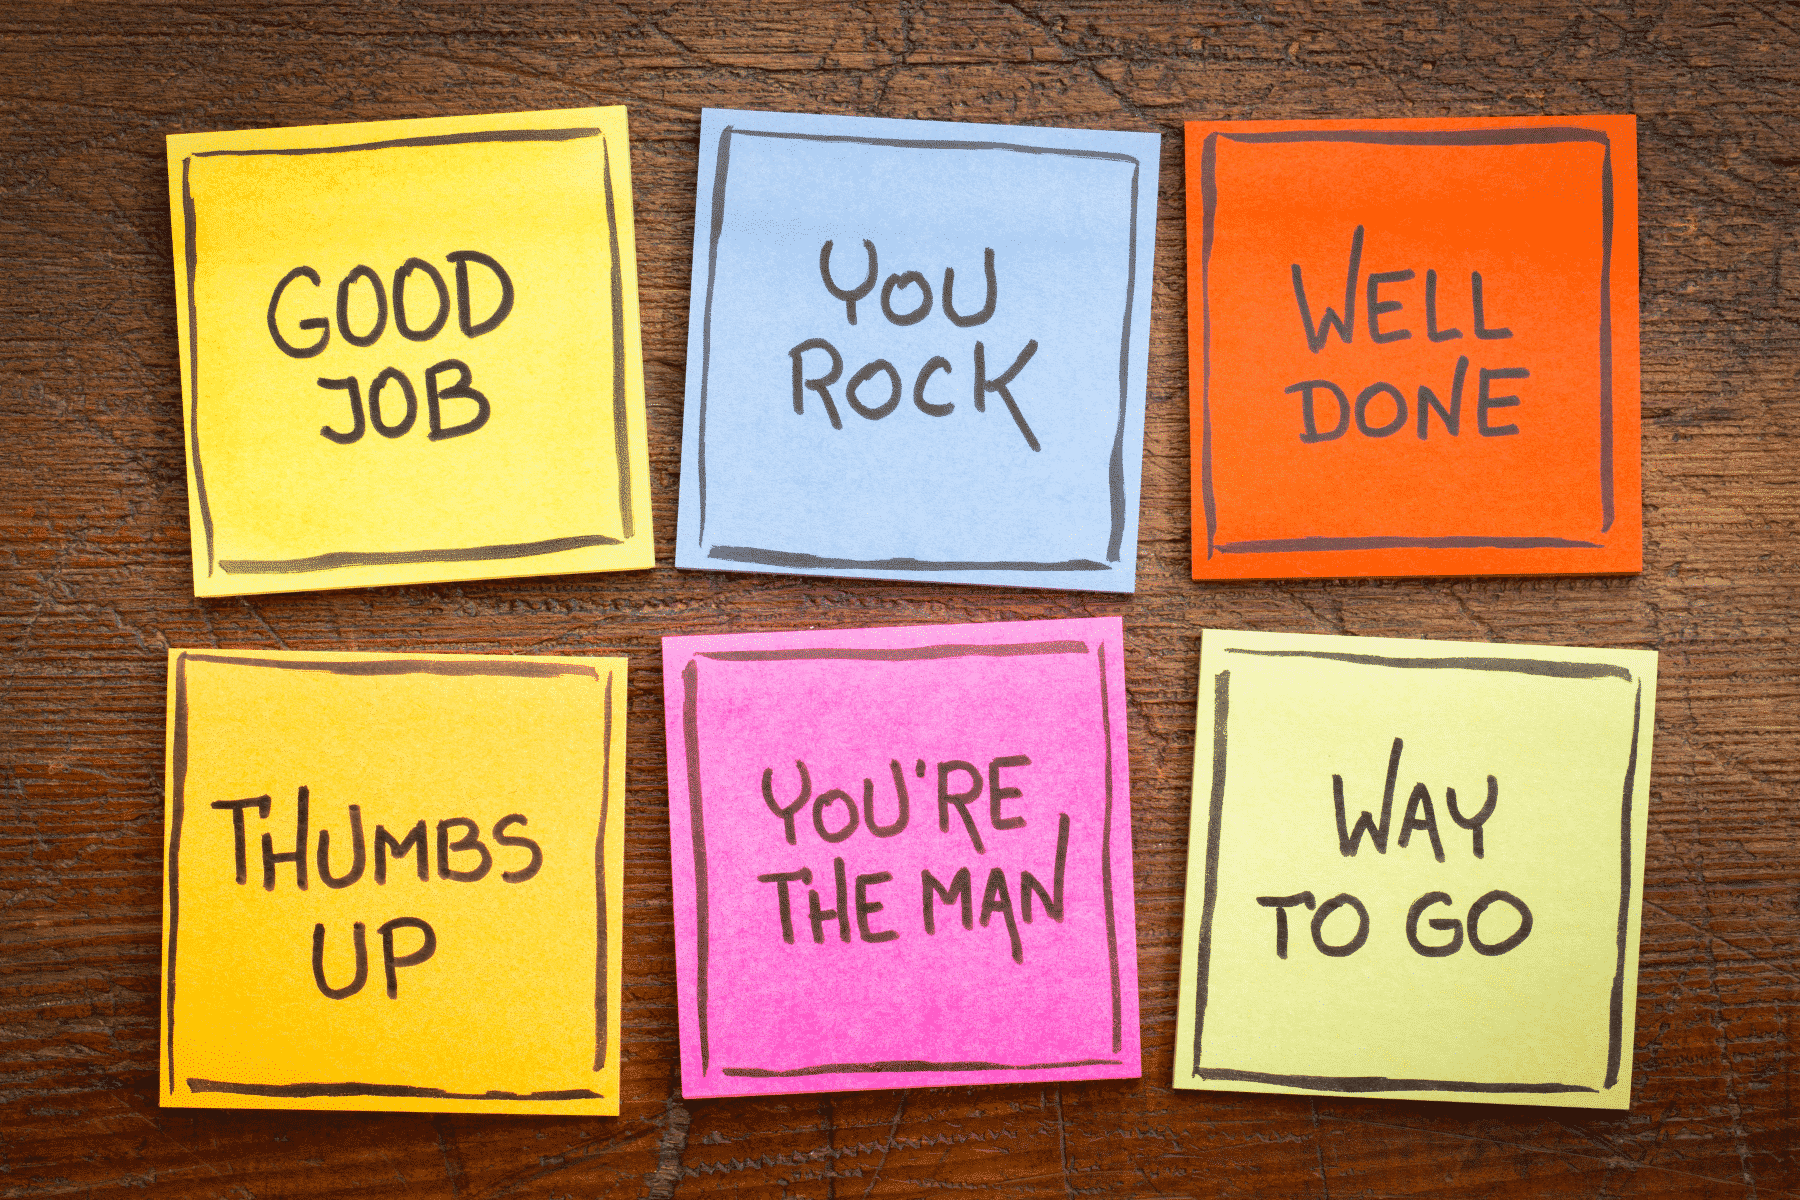 Job Well Done Post-it notes